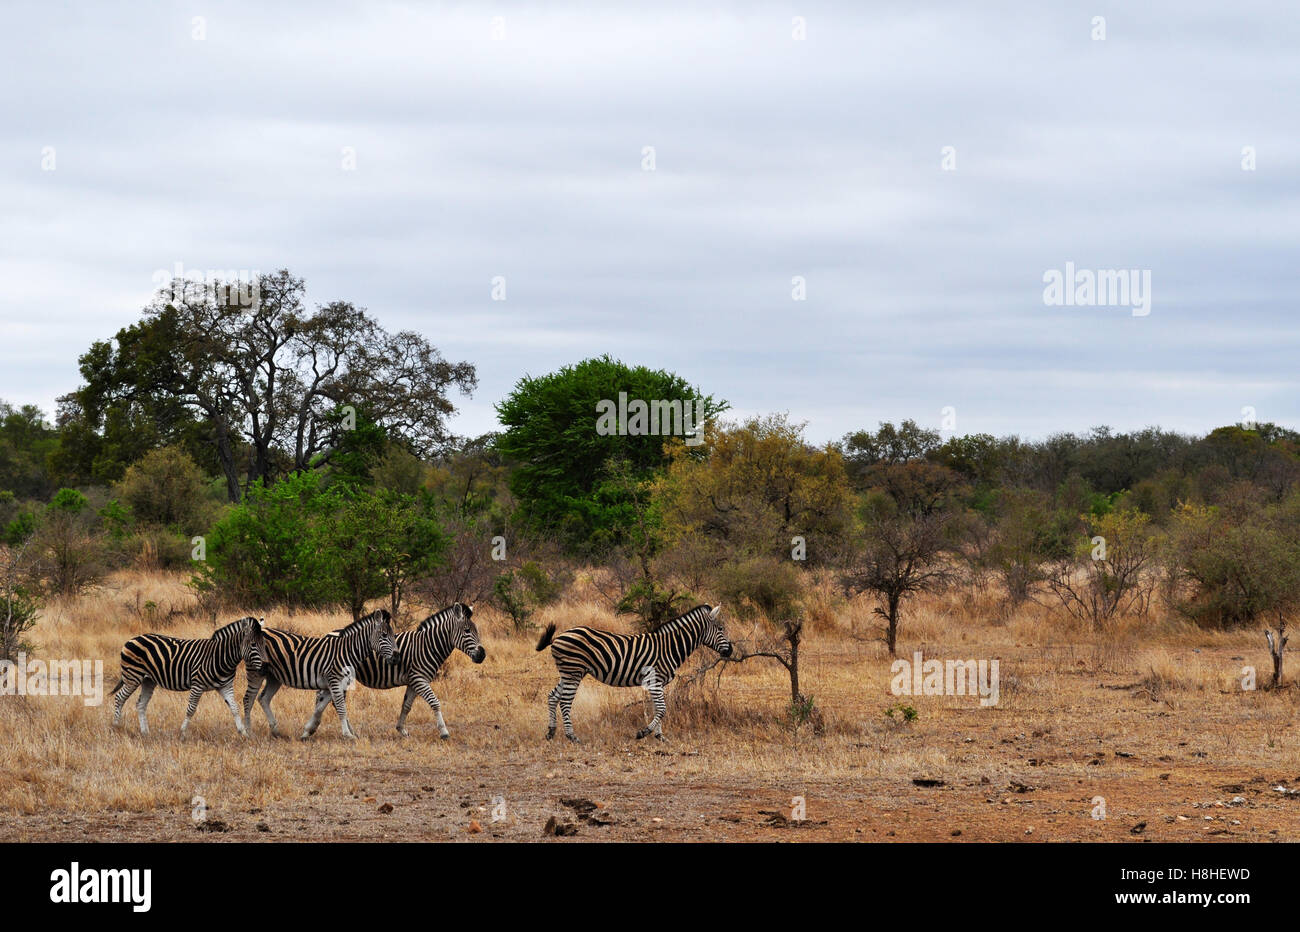 Safari in South Africa, green savannah: a herd of zebras in the Kruger National Park, the largest game reserve in Africa established in 1898 Stock Photo